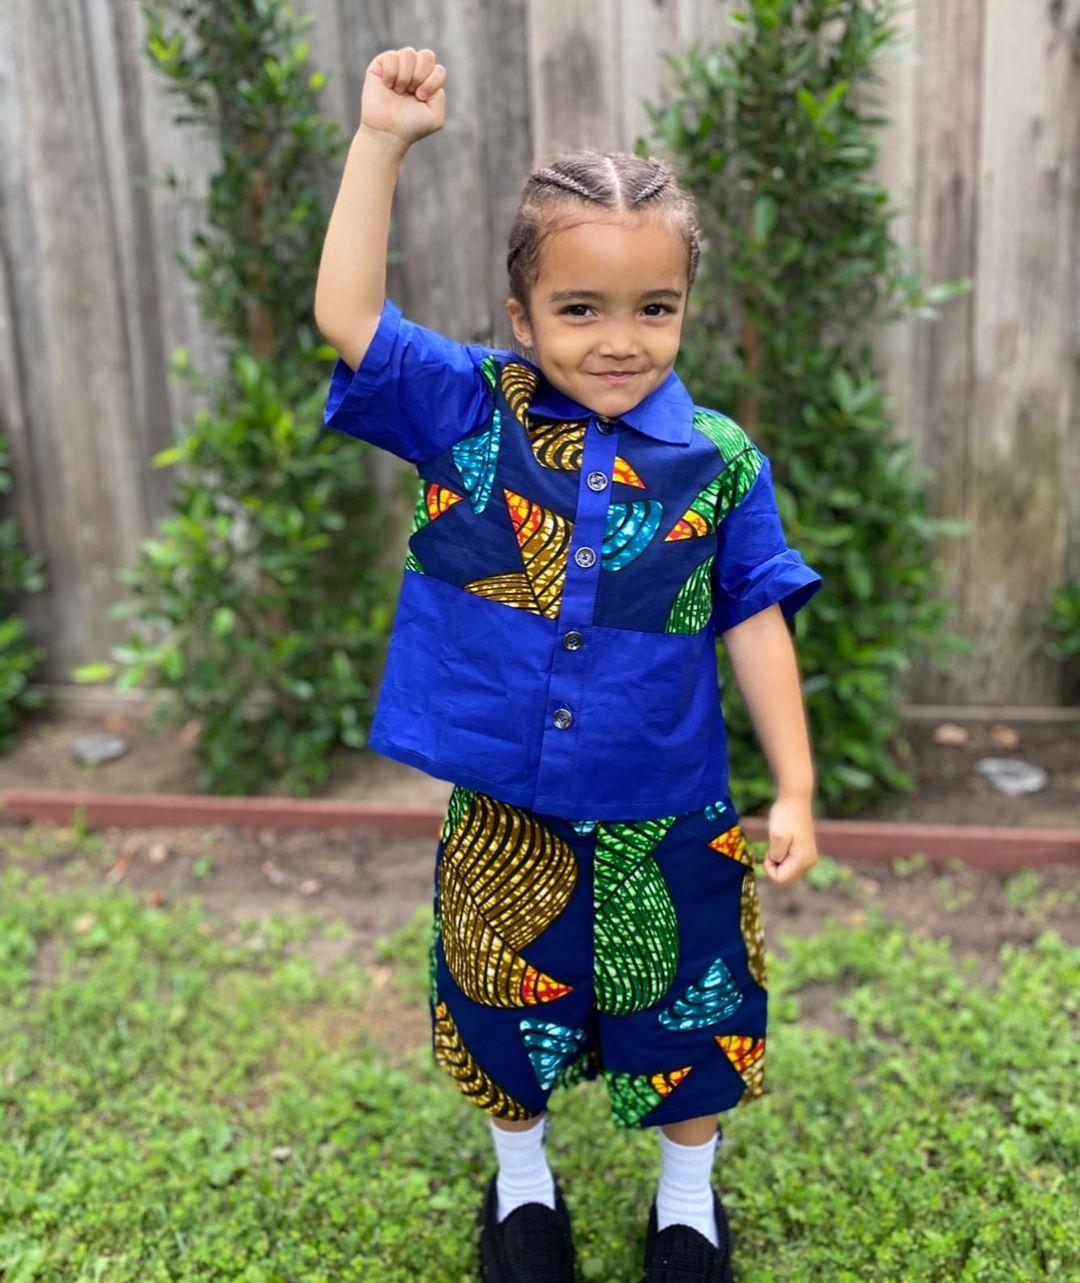 Lauren London Gives Update On Being A Single Mom Since Nipsey Passing